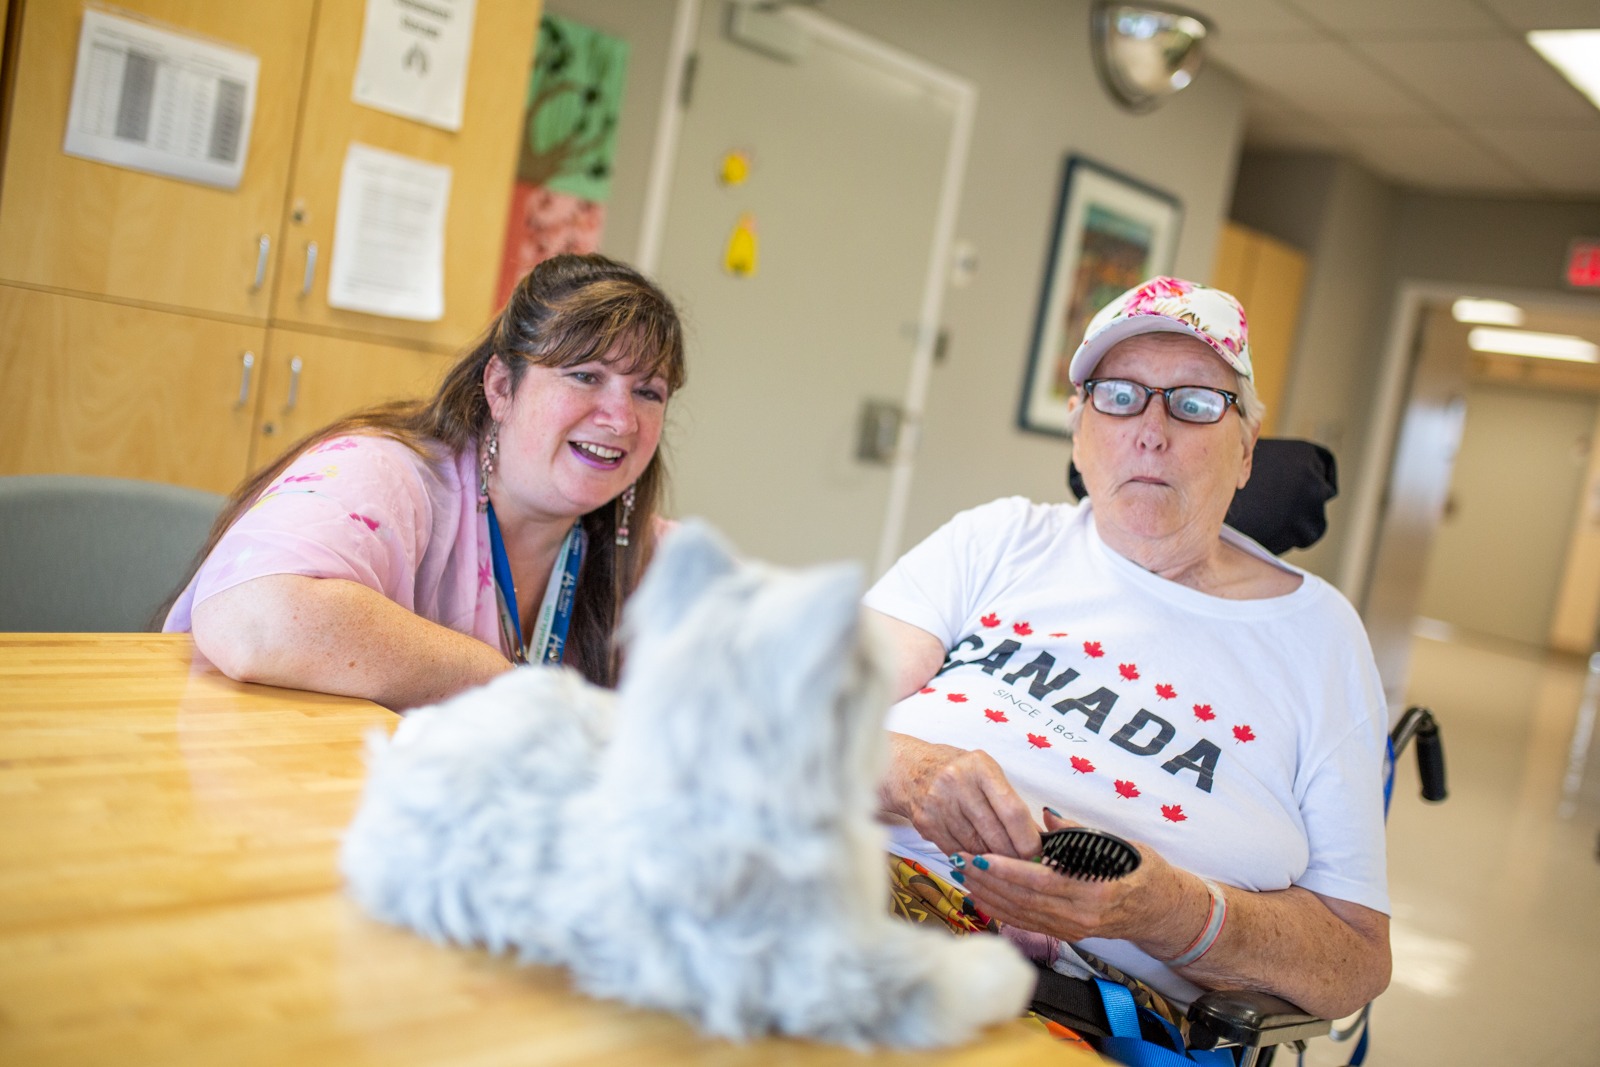 Therapeutic recreationist, Jean Riley, smiles a a patient makes funny faces at a grey robotic cat